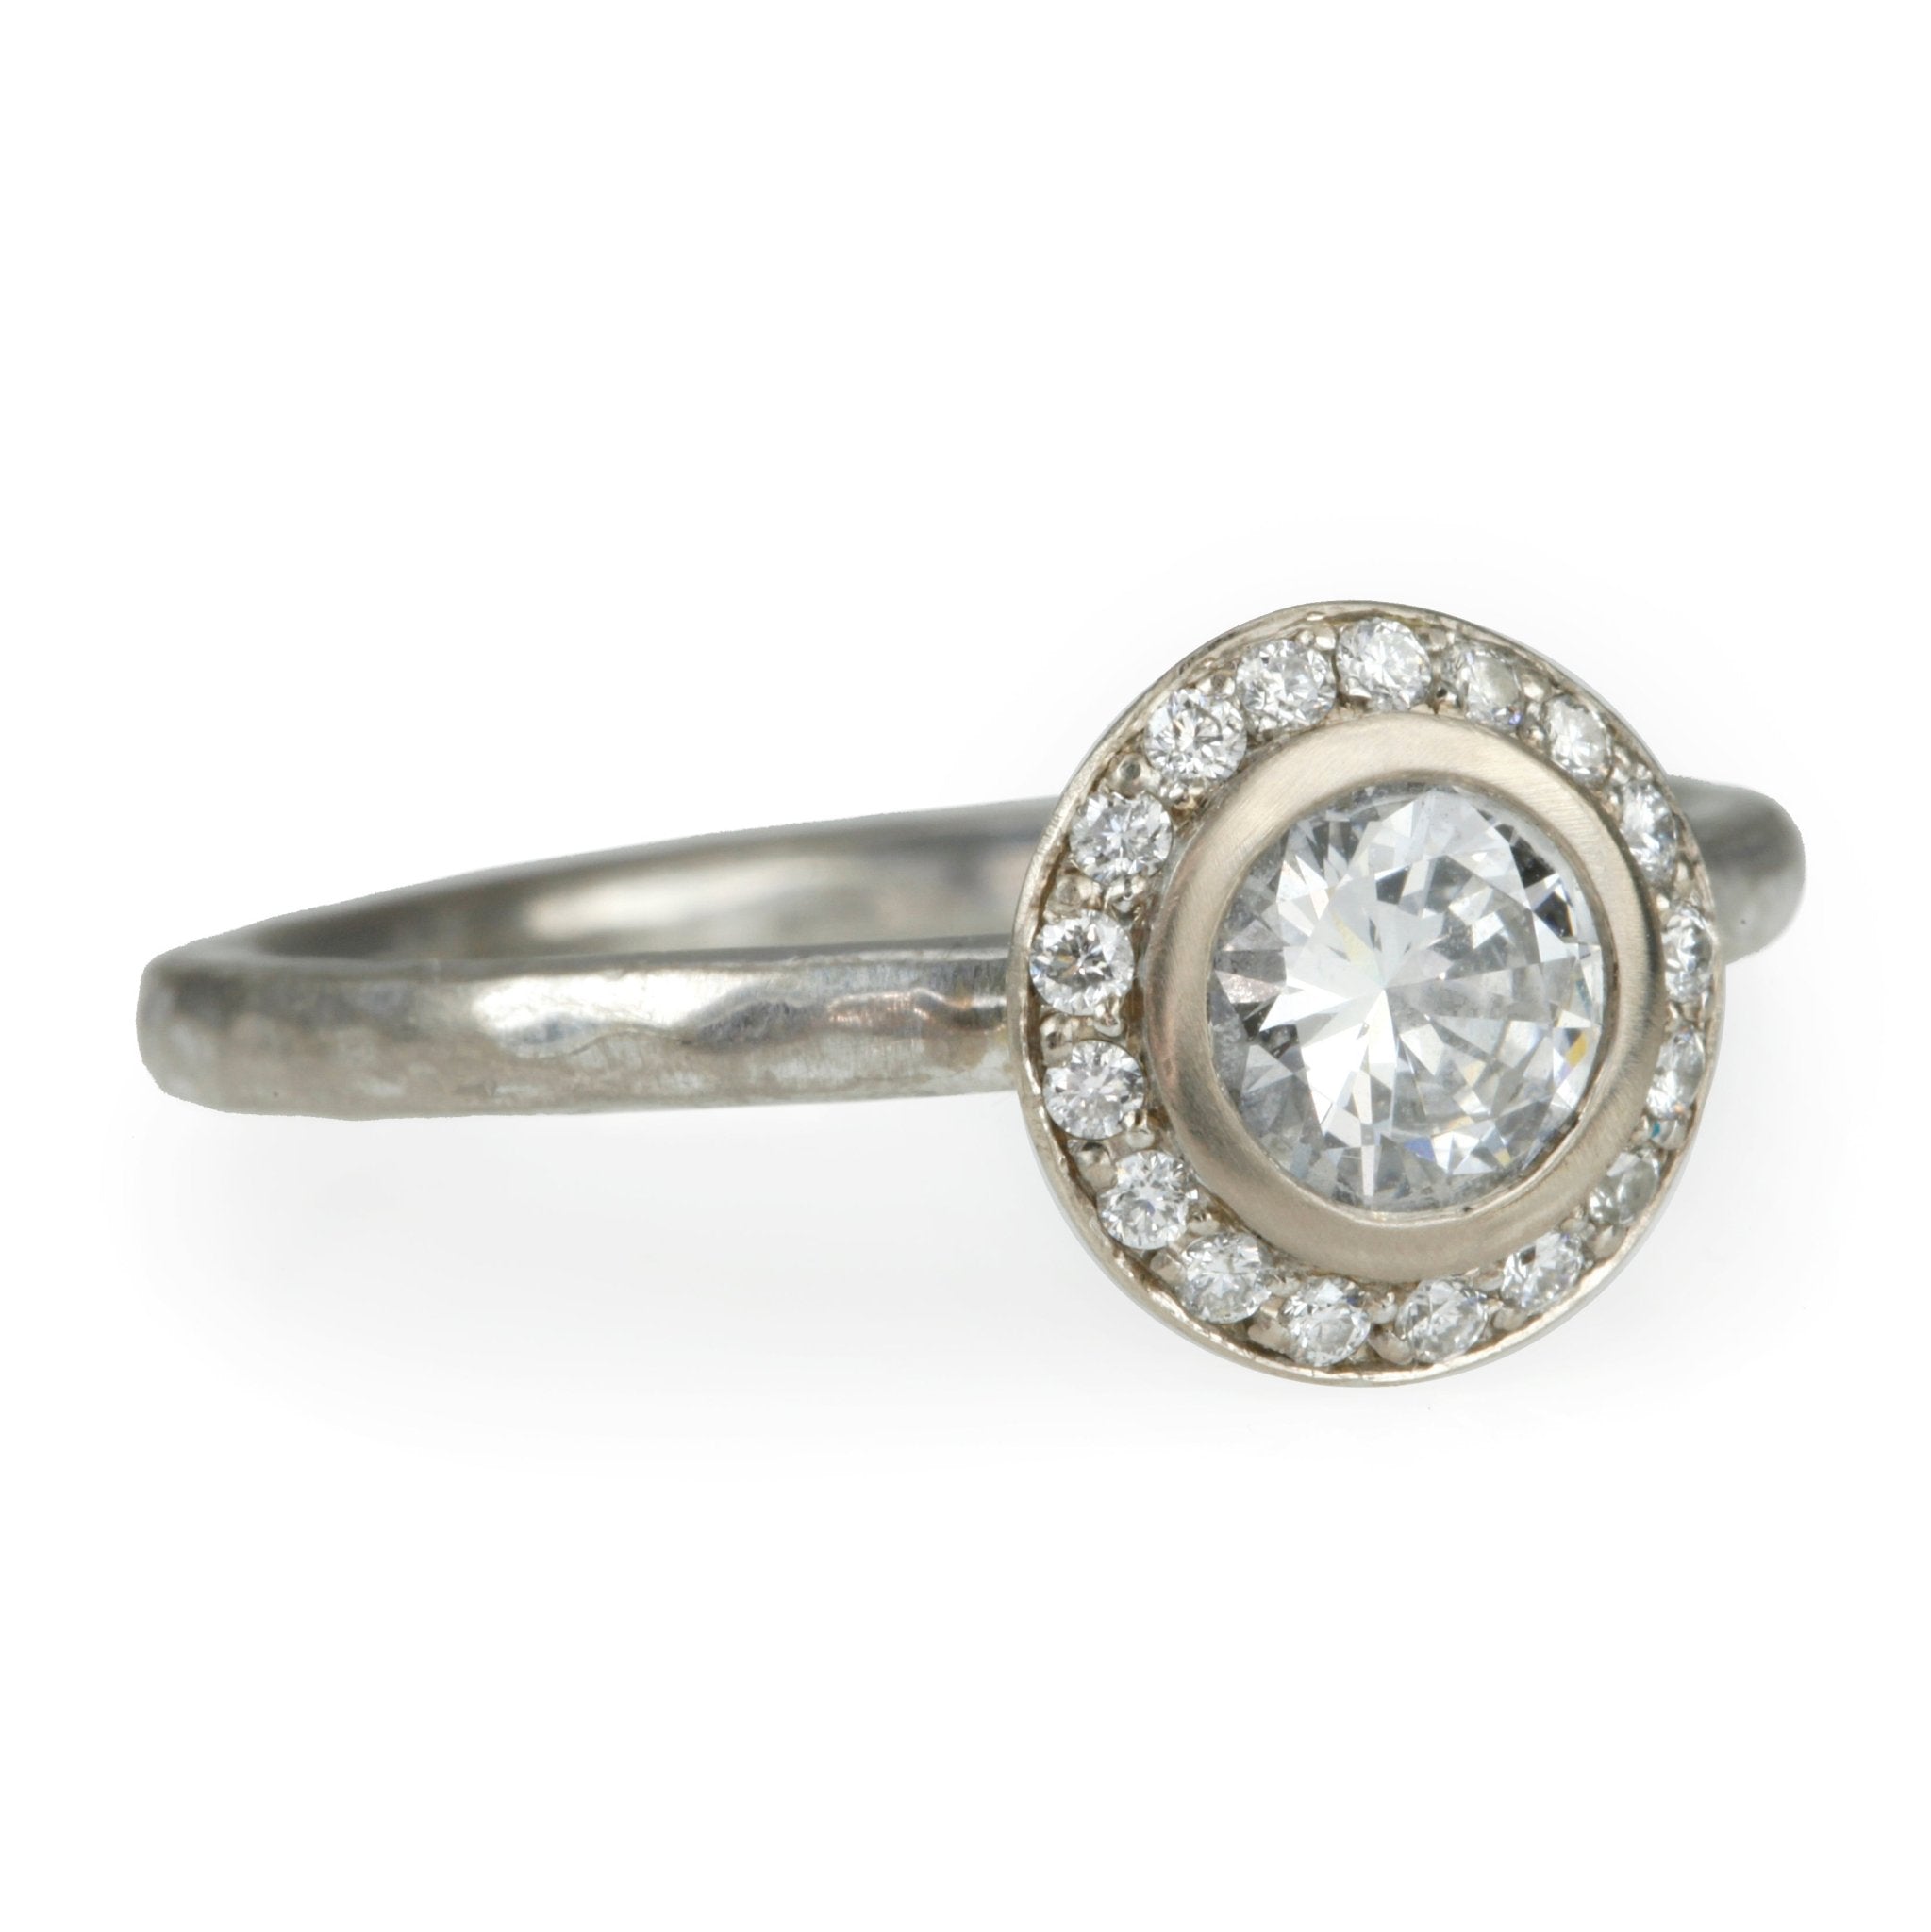 Annie Fensterstock White Gold and Diamond Engagement Ring with Pave Diamond Halo